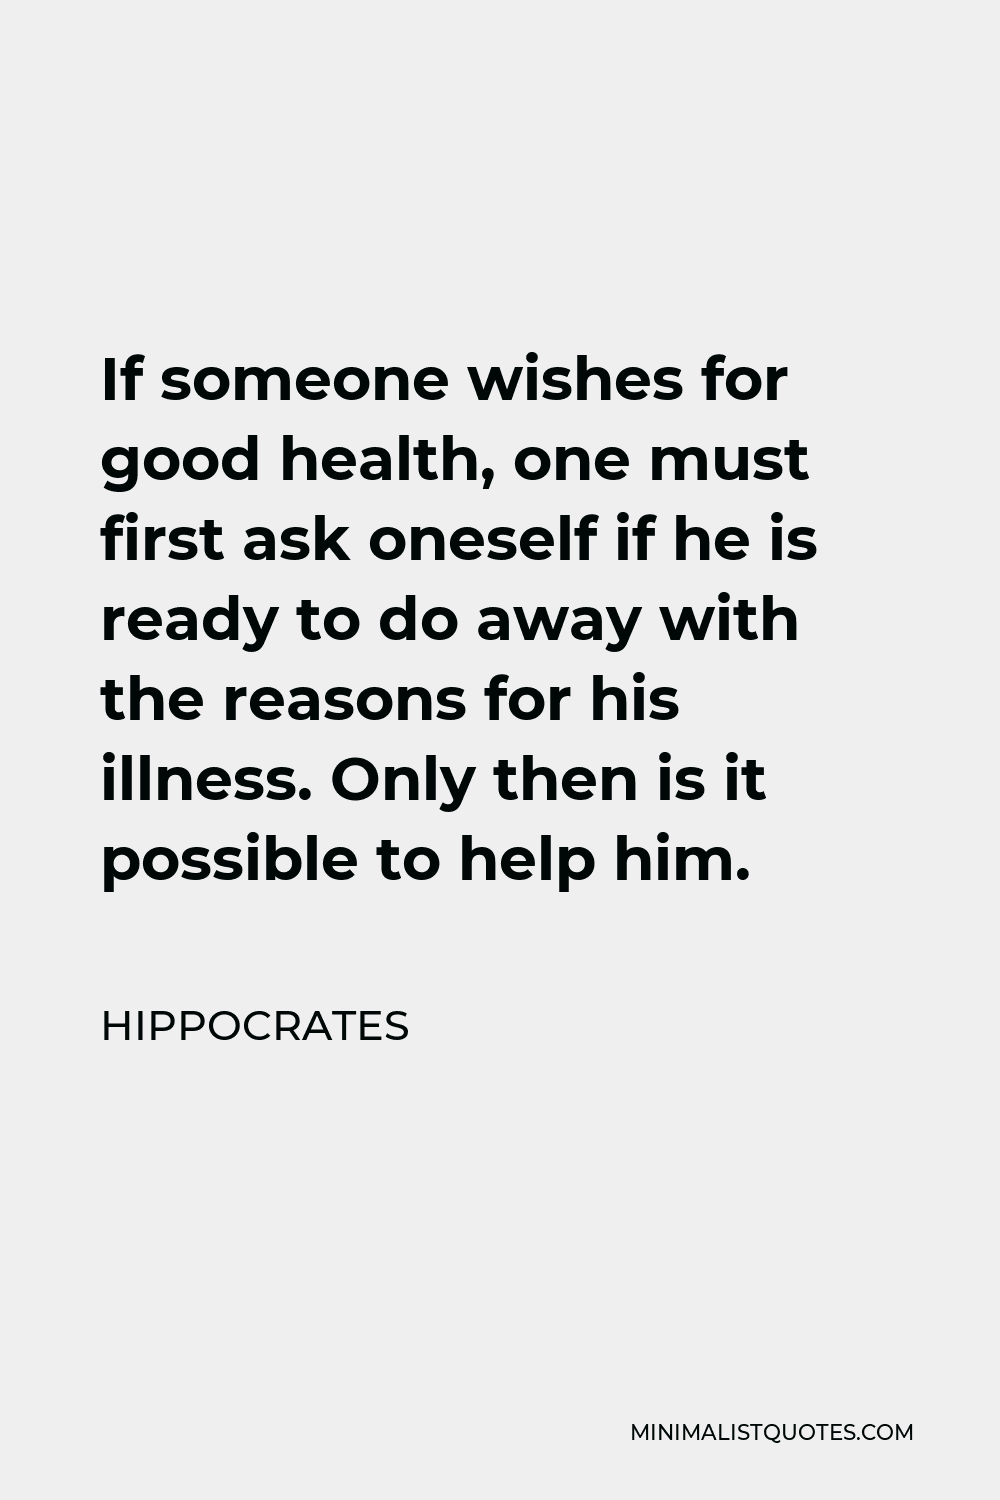 Hippocrates Quote: If someone wishes for good health, one must first ...